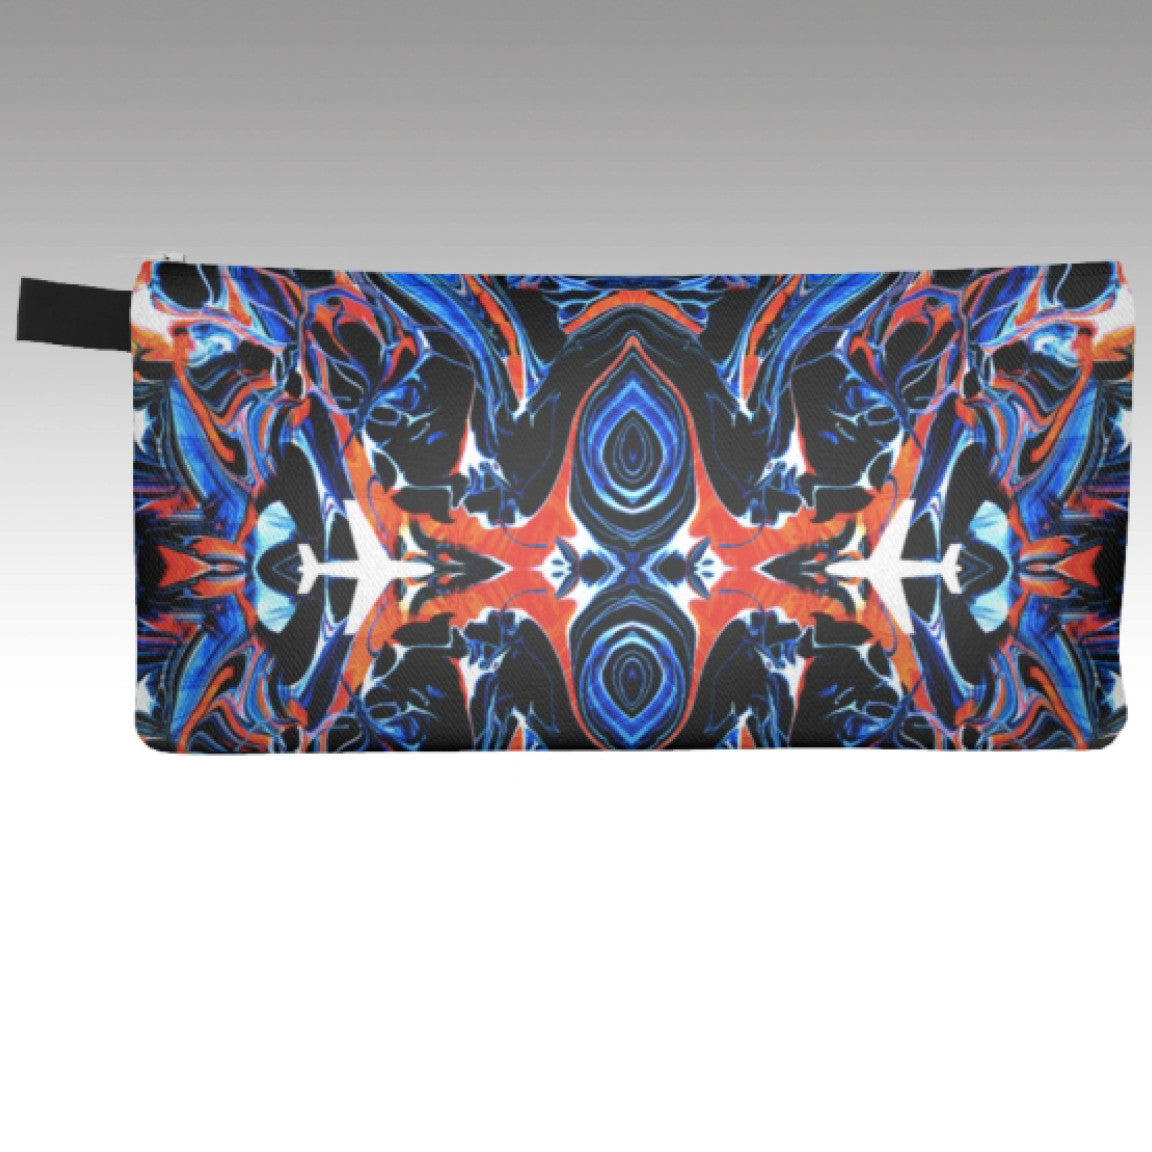 Pencil Pouch in the Mystic kaleidoscope / airplane design. Red, orange & blue. Show your love of aviation and travel. Perfect for make-up bag, coin purse, phone carrying case.